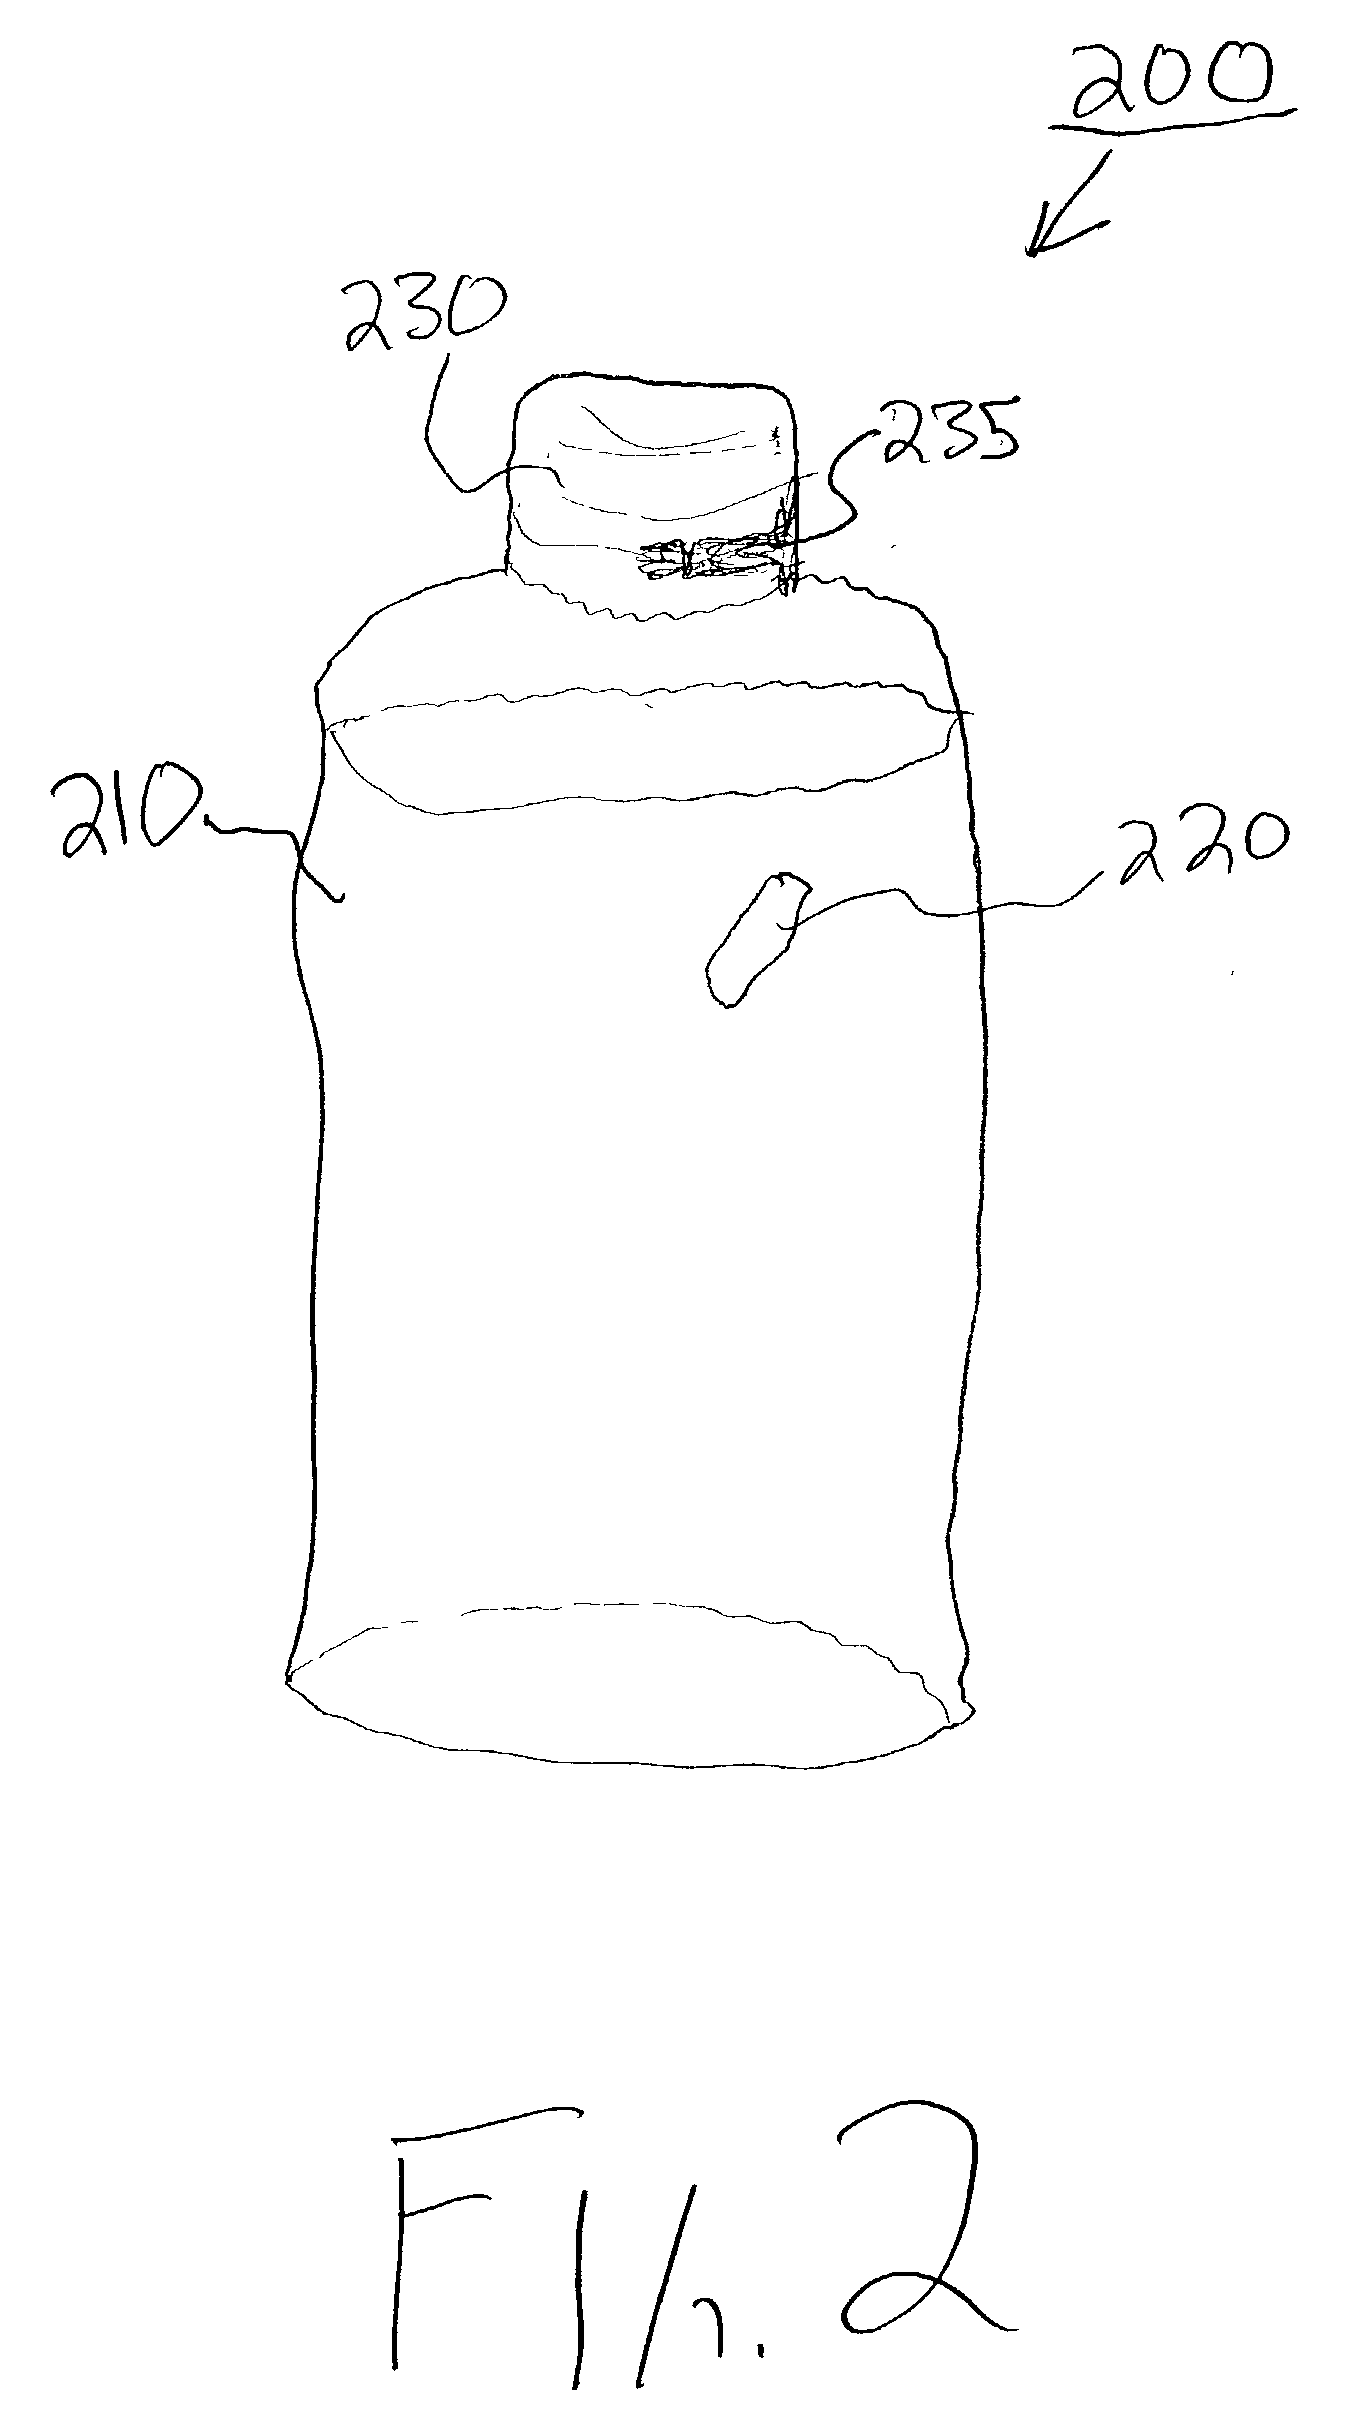 Device and method for illuminating liquid containers internally